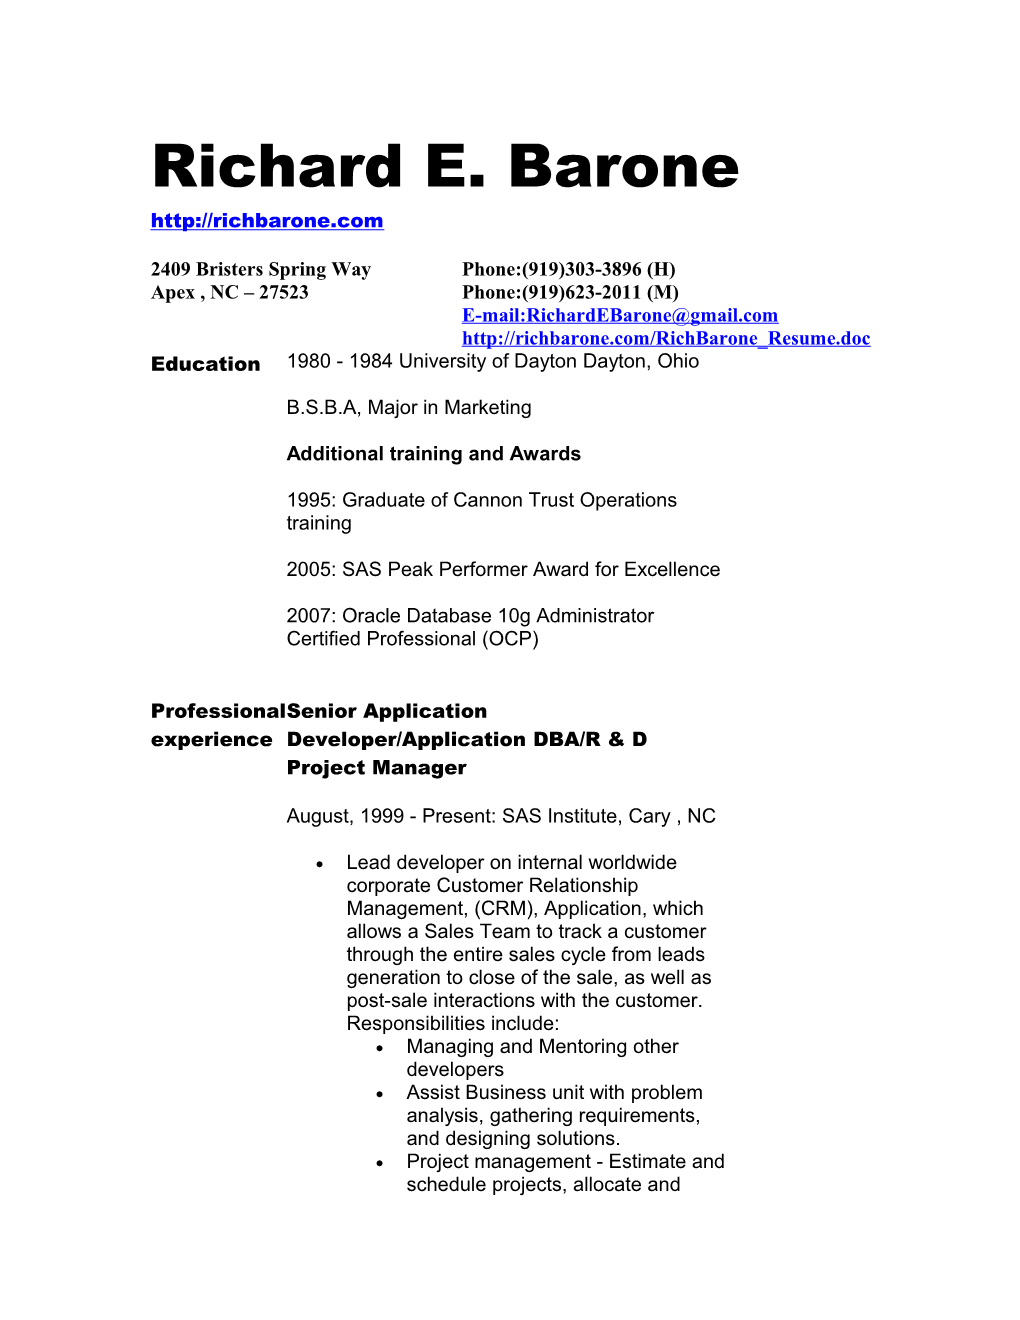 Resume for Rich Barone